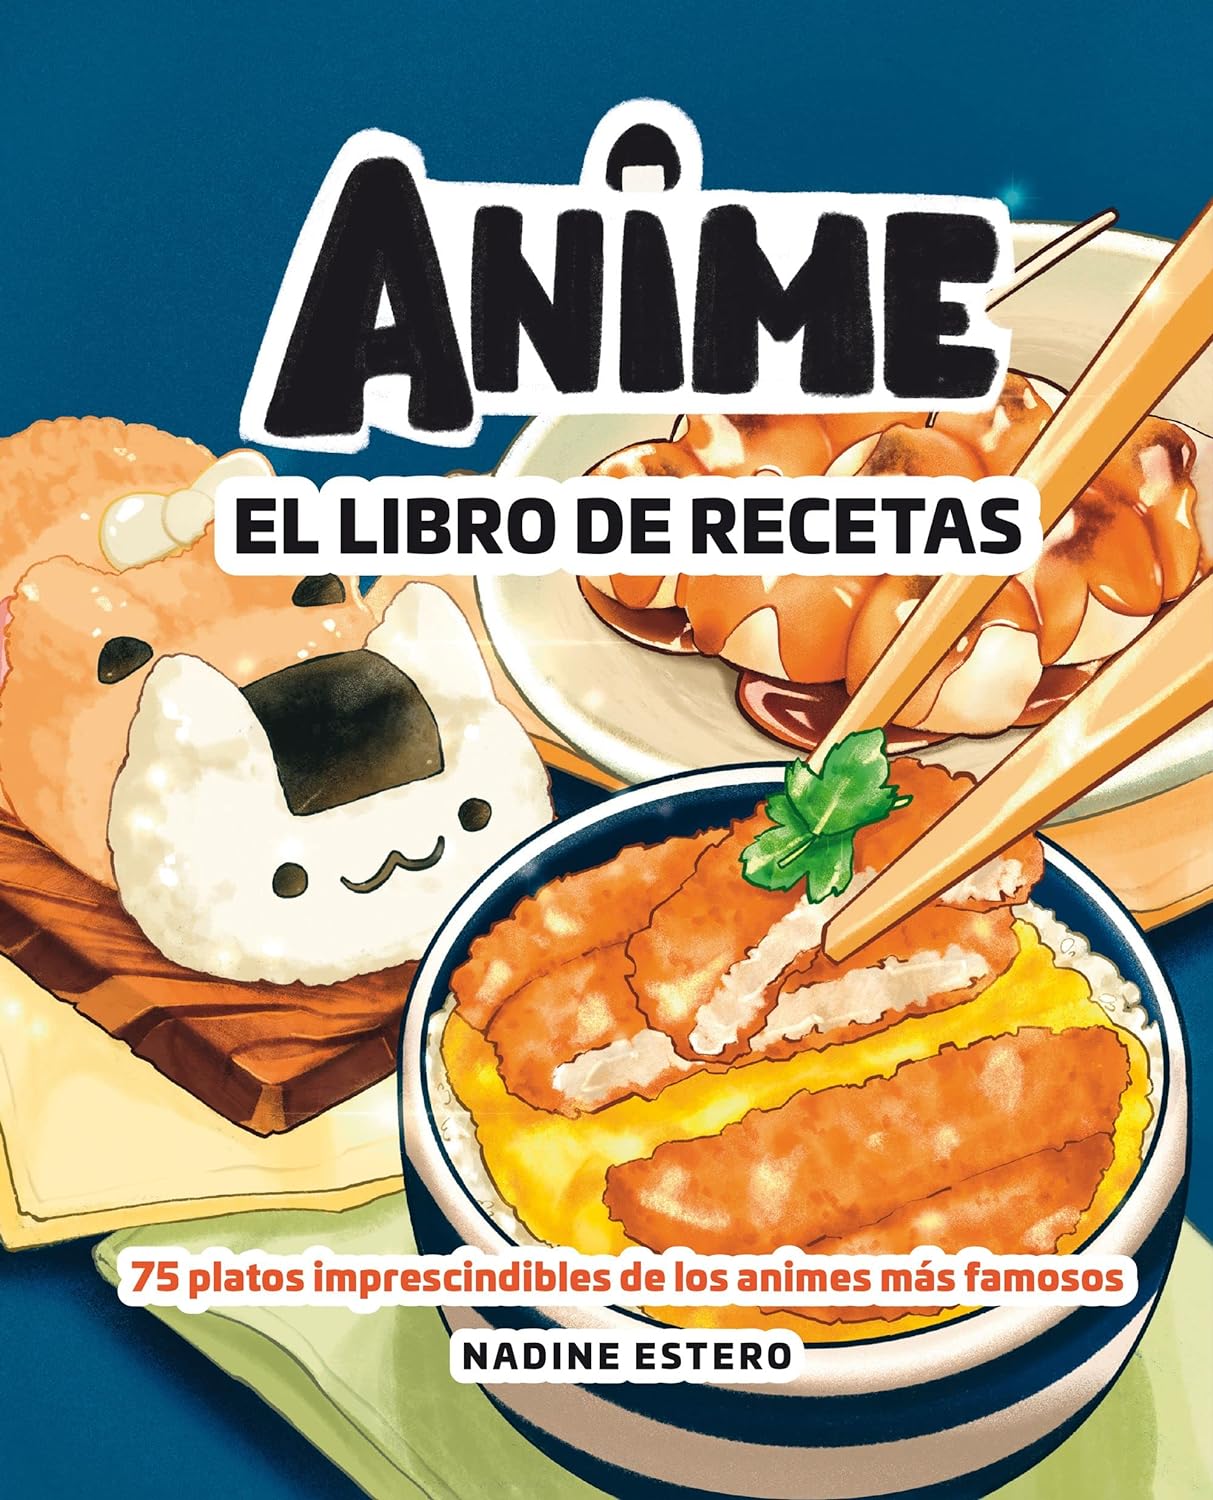 Anime. The recipe book: 75 essential dishes from the most famous animes